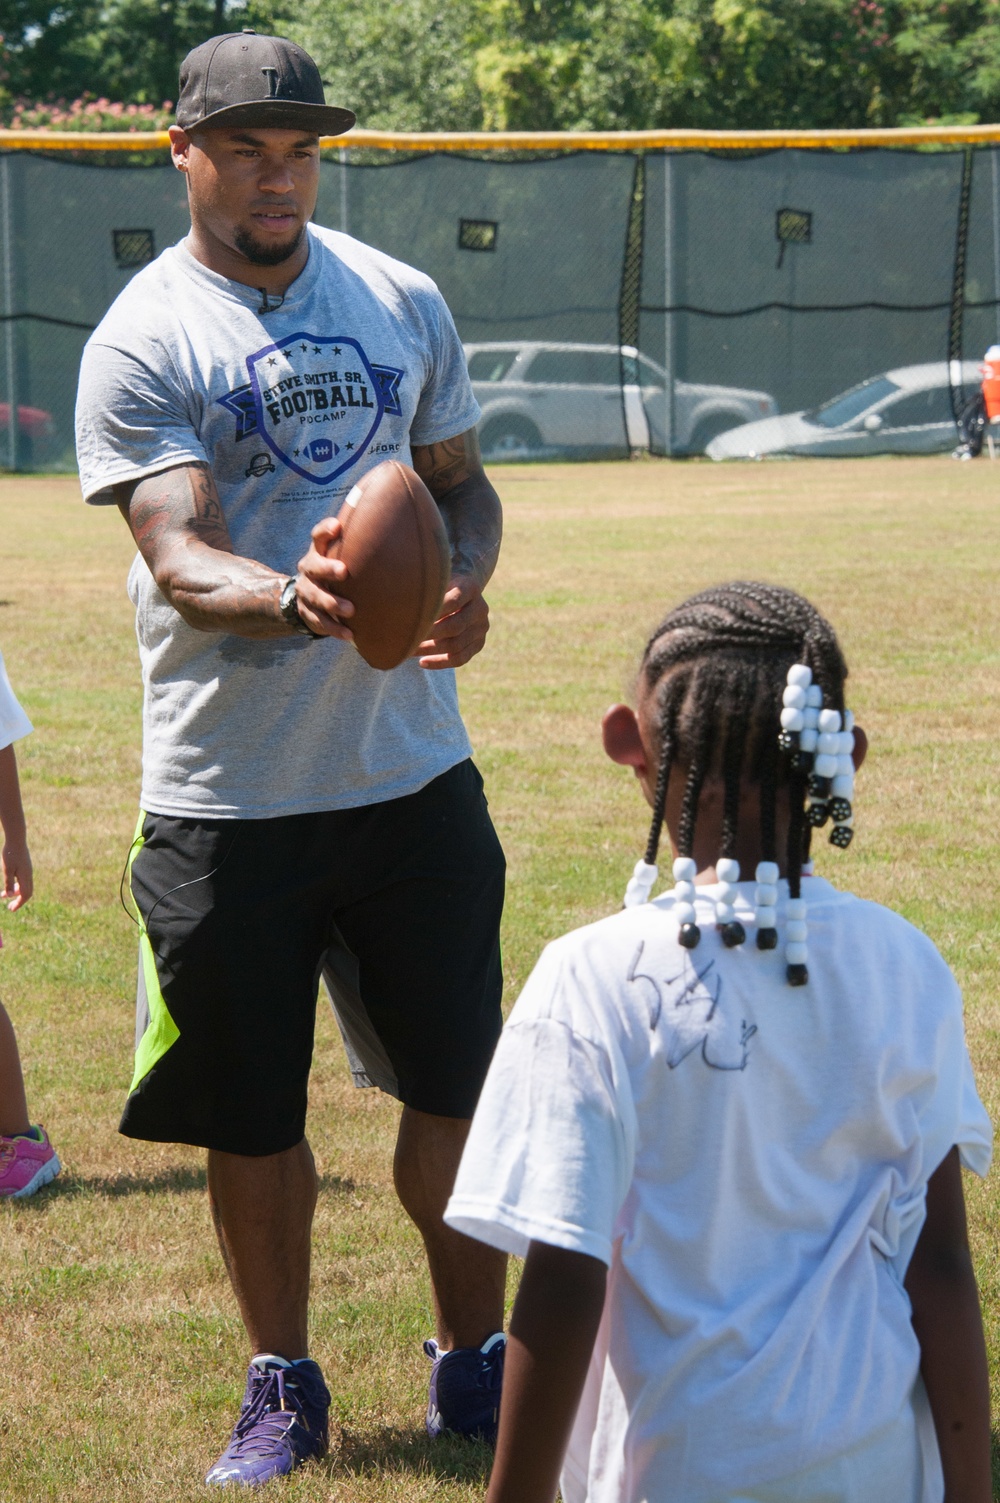 Baltimore Ravens player brings camp to Maxwell